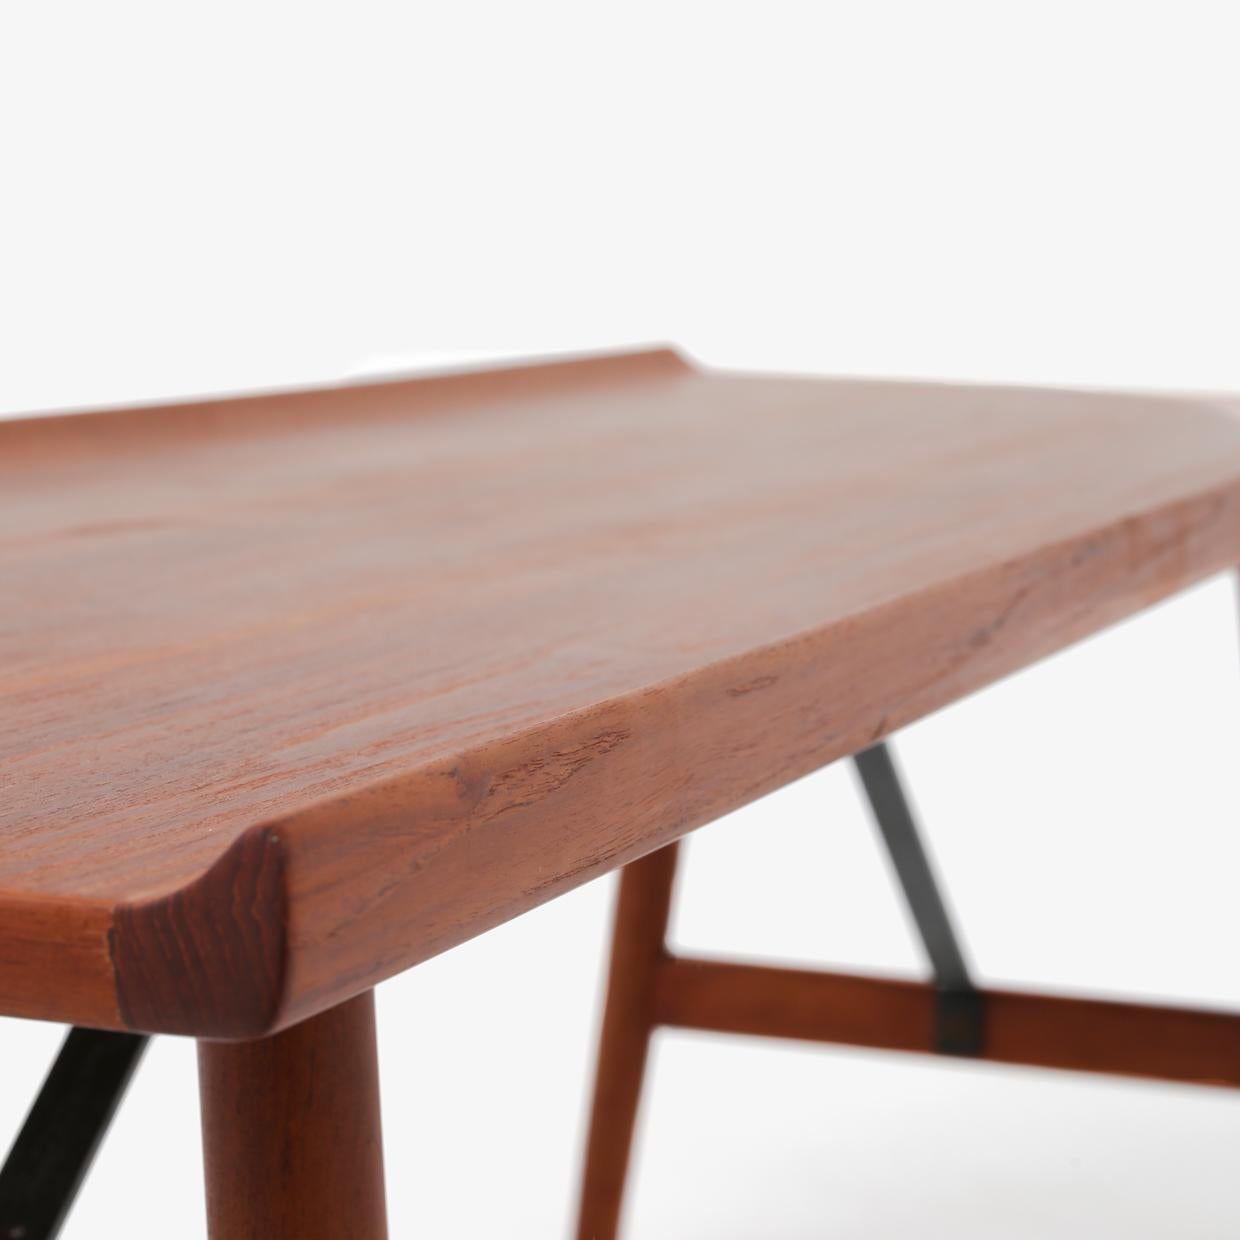 20th Century Coffee Table by Børge Mogensen